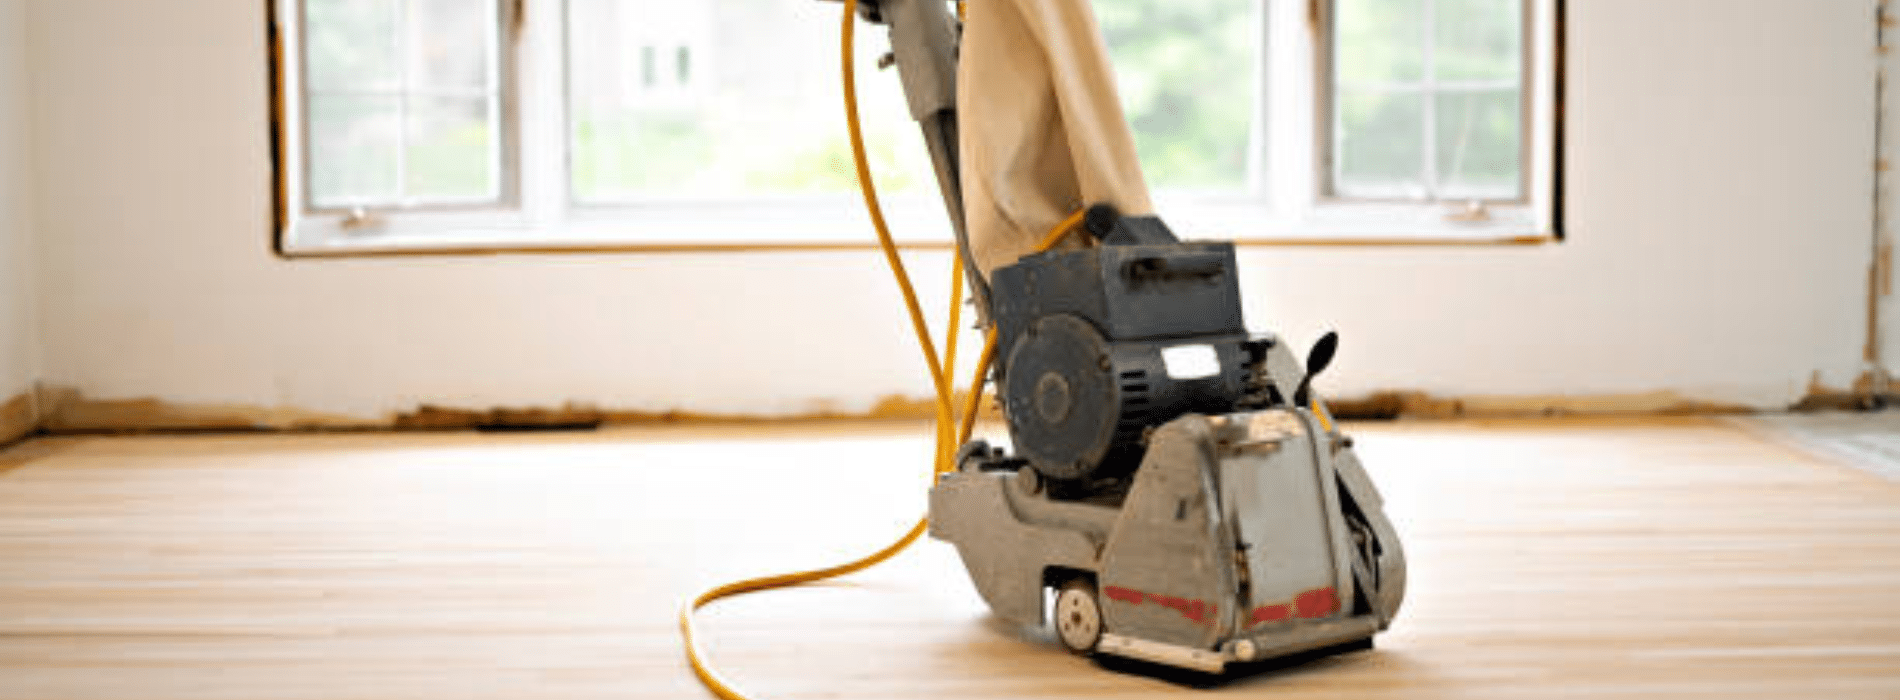 In Westcombe Park, SE3, Mr Sander® use the Bona Belt UX sander (2.2 kW, 230V, 50 Hz) with a 200x750 mm size. Connect it to a dust extraction system with a HEPA filter for a clean and efficient sanding of parquet floors.